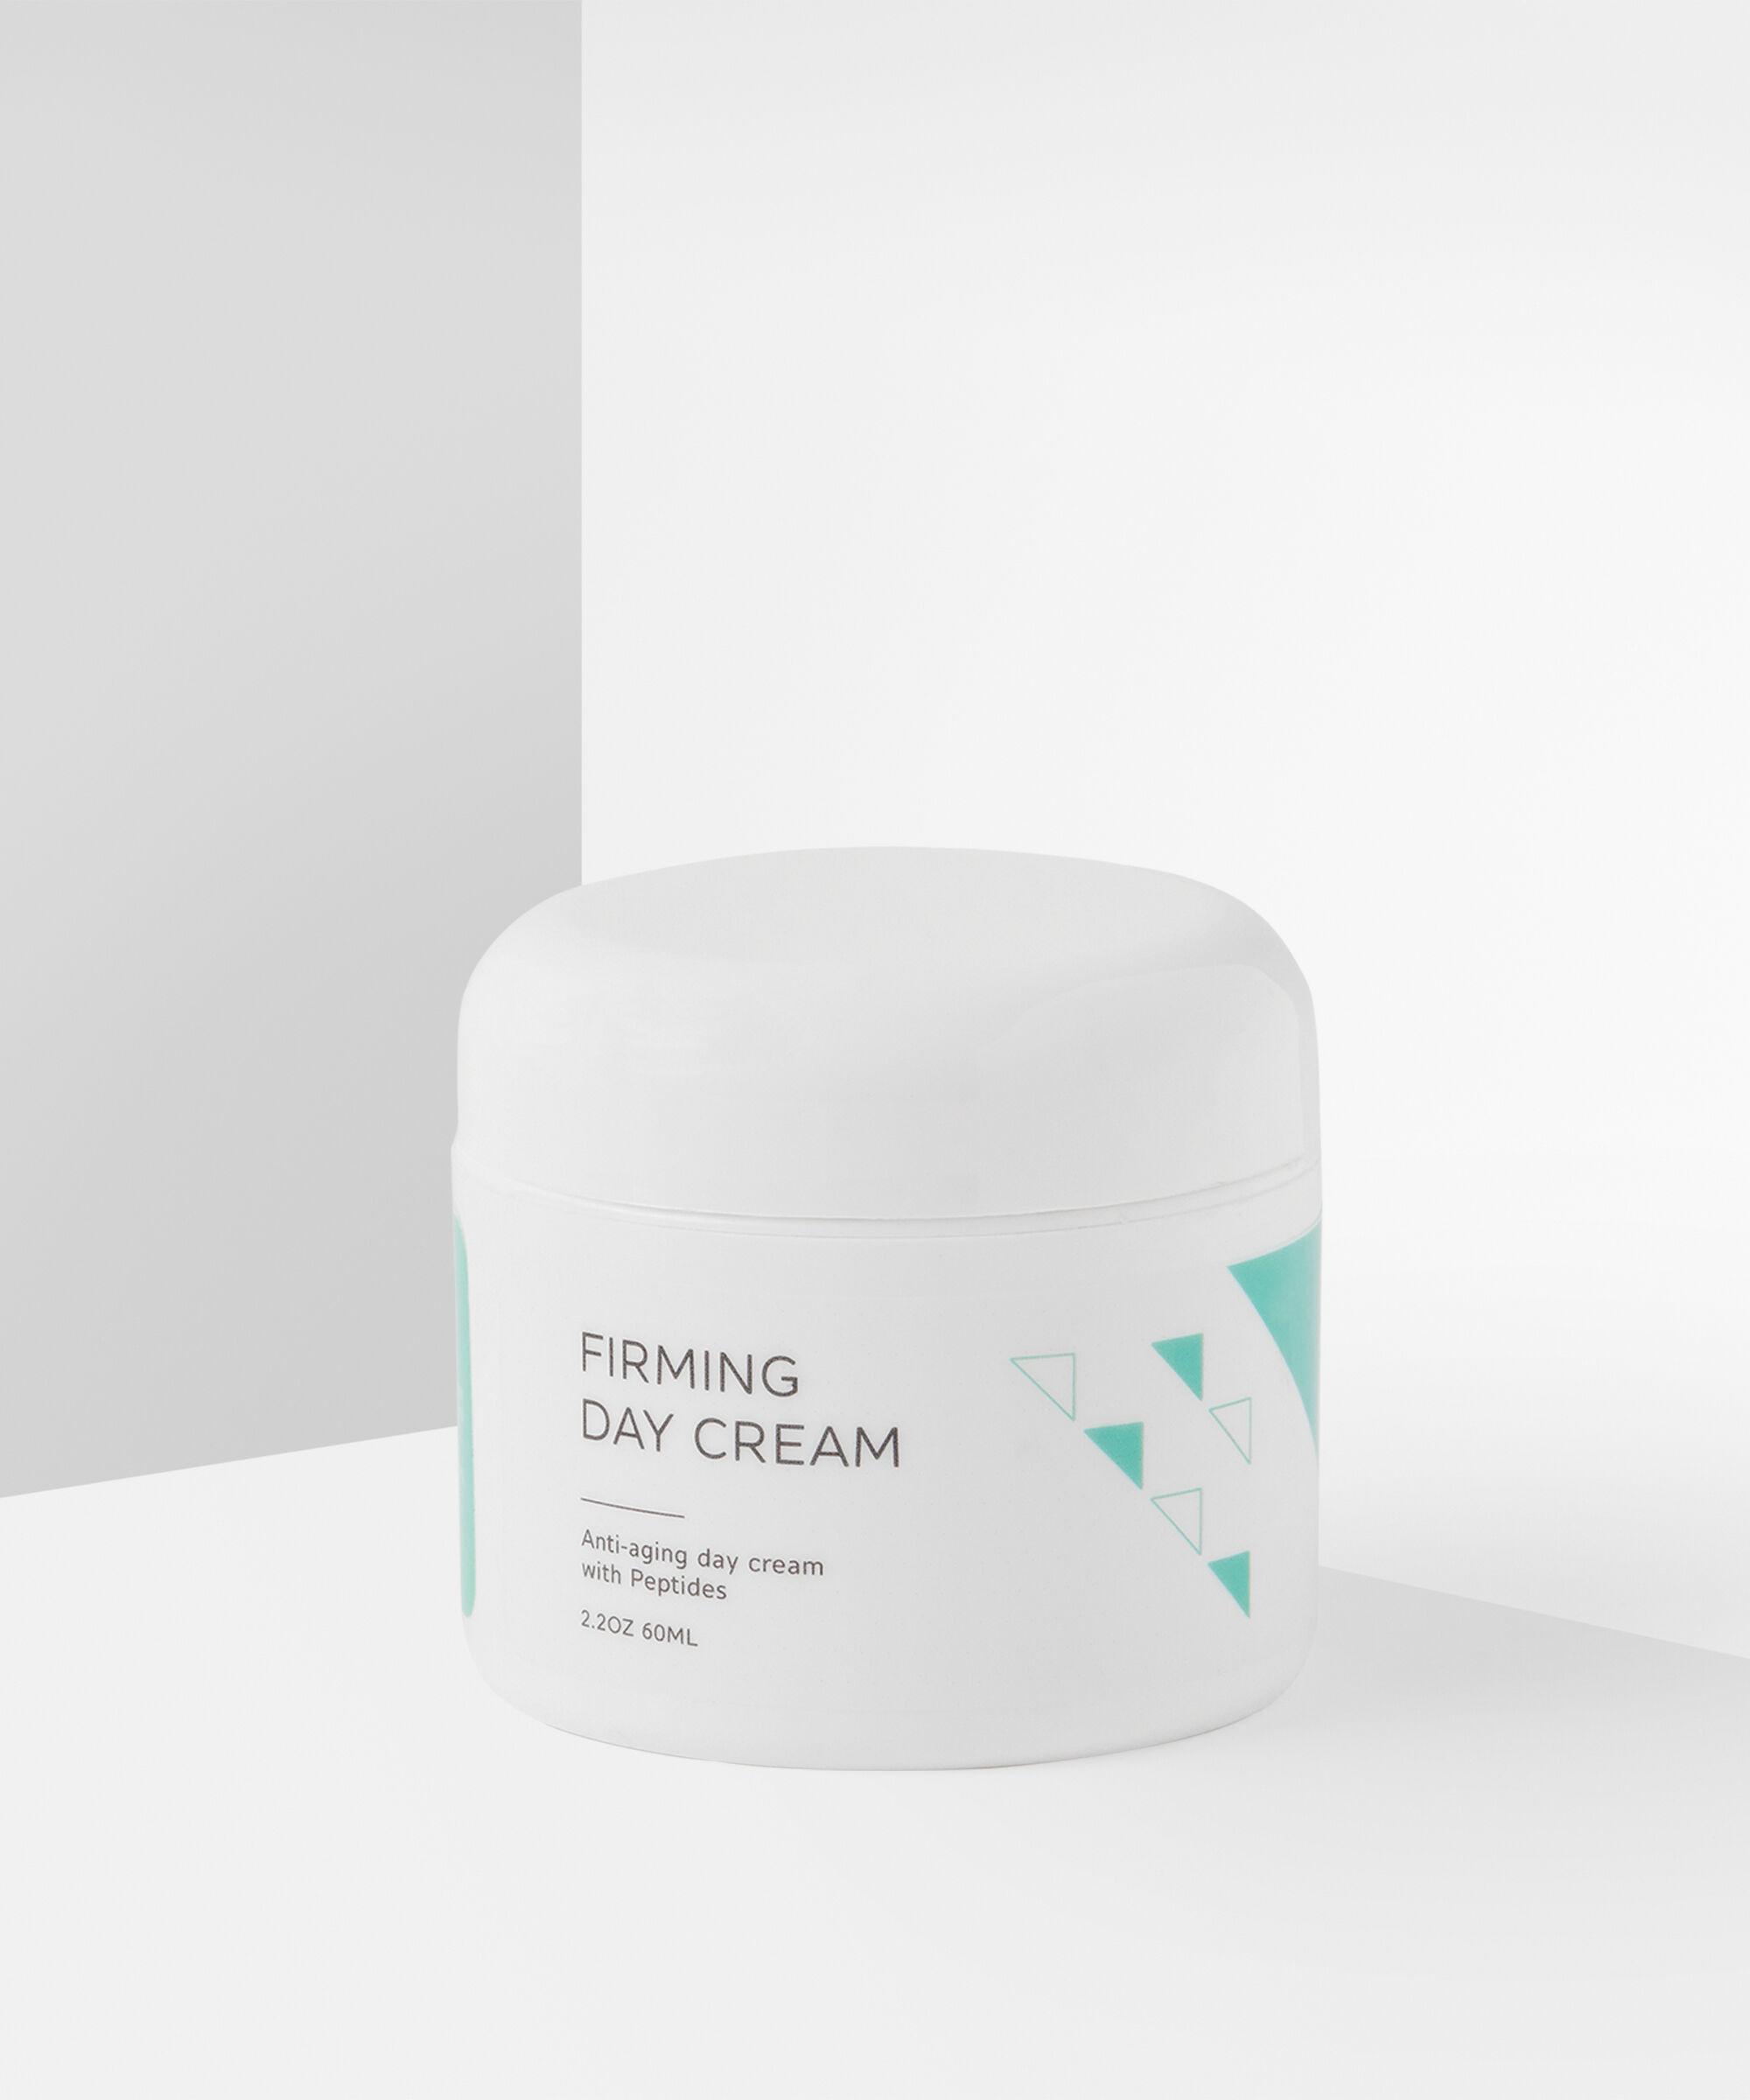 OFRA - Firming Day Cream